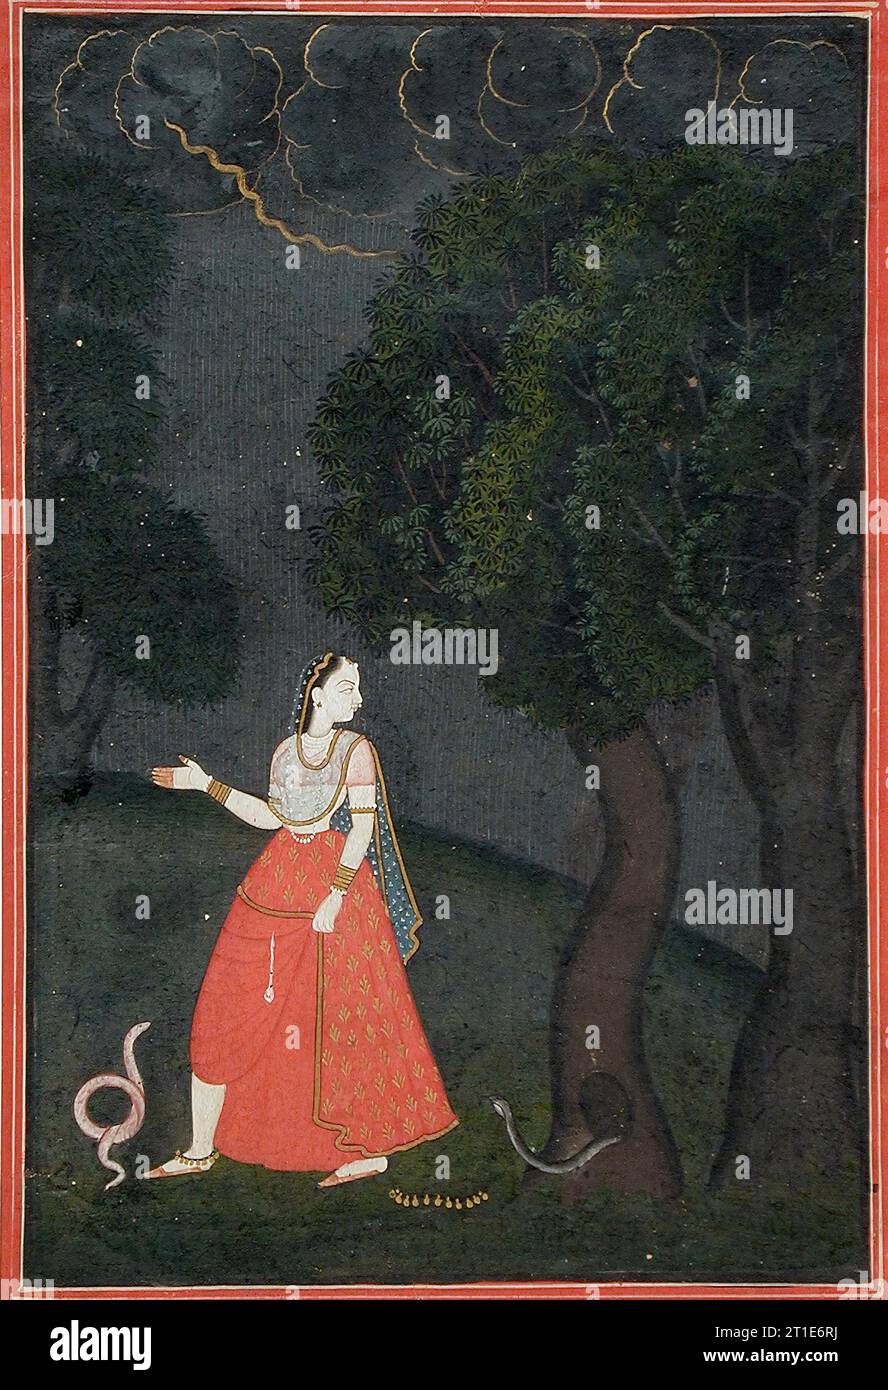 The Eager Heroine on Her Way to Meet Her Lover out of Love (Kama Abhisarika Nayika), c1760. Stock Photo